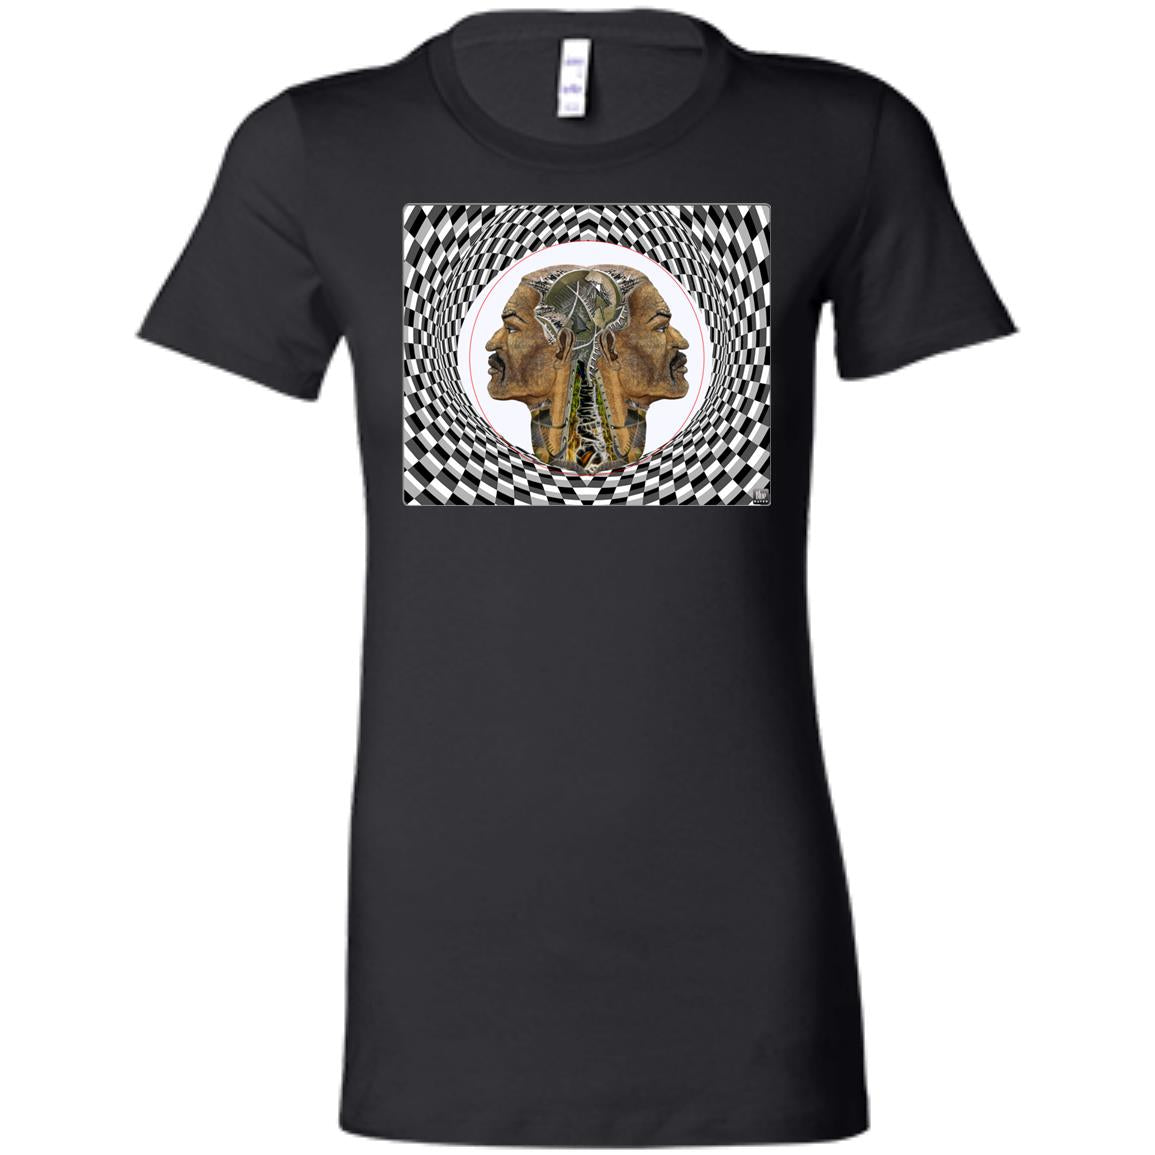 MAN IN THE MACHINE - Women's Fitted T-Shirt